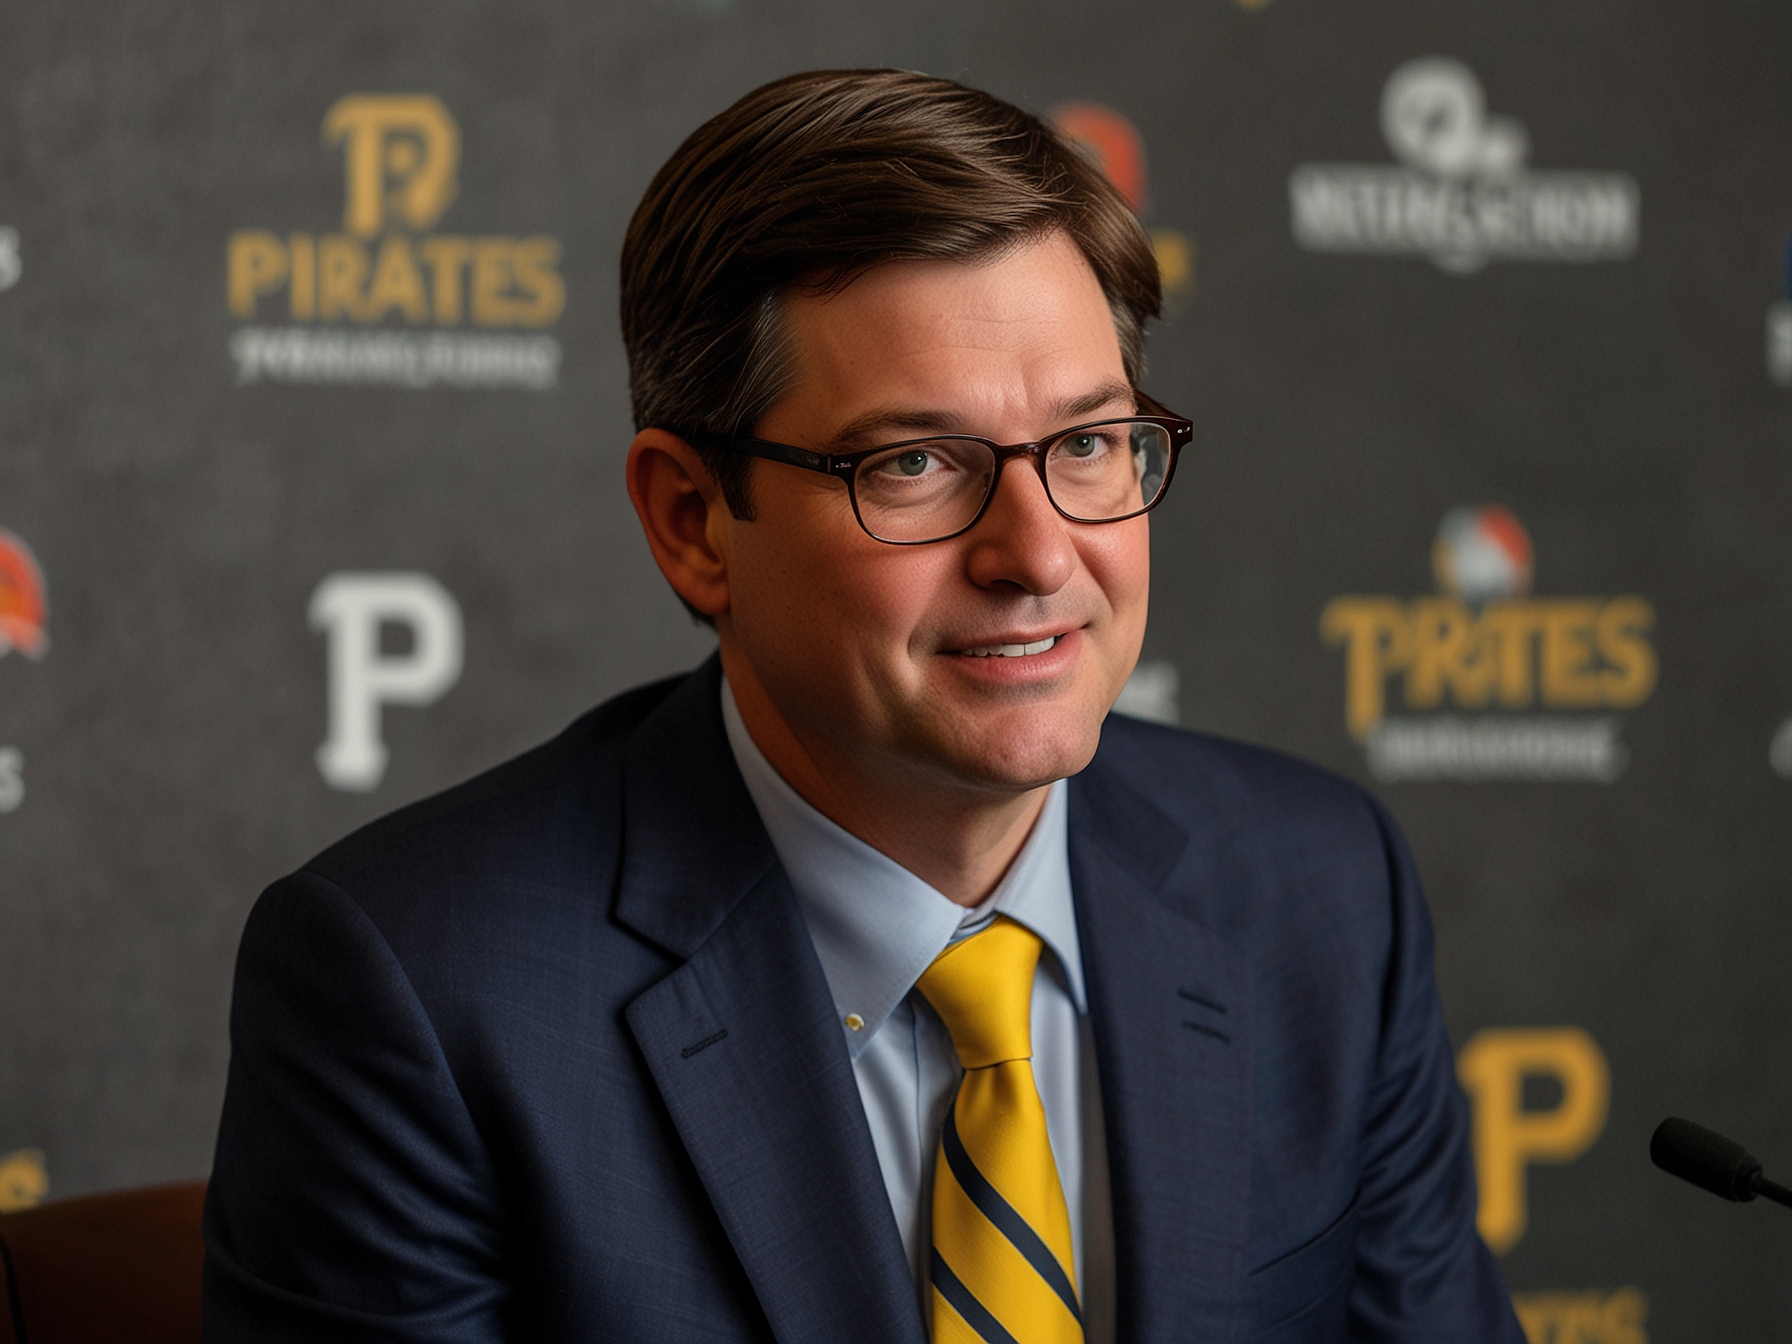 Pittsburgh Pirates owner Bob Nutting speaks to the press, outlining the team’s strategic approach as the MLB trade deadline nears, emphasizing long-term vision and potential acquisitions.